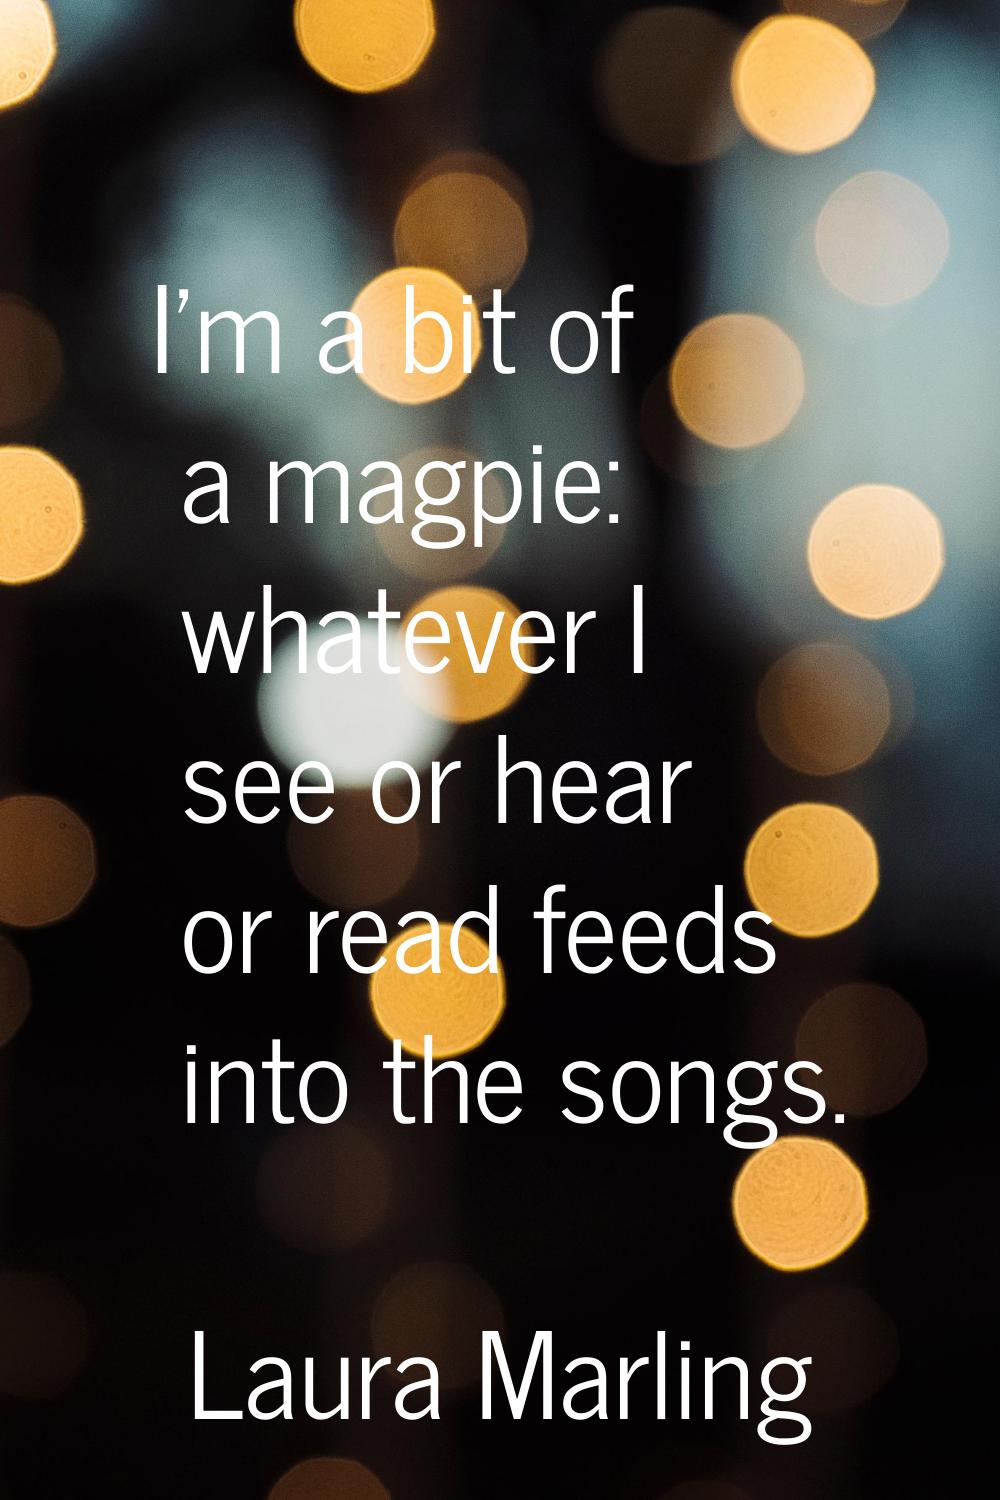 I'm a bit of a magpie: whatever I see or hear or read feeds into the songs.